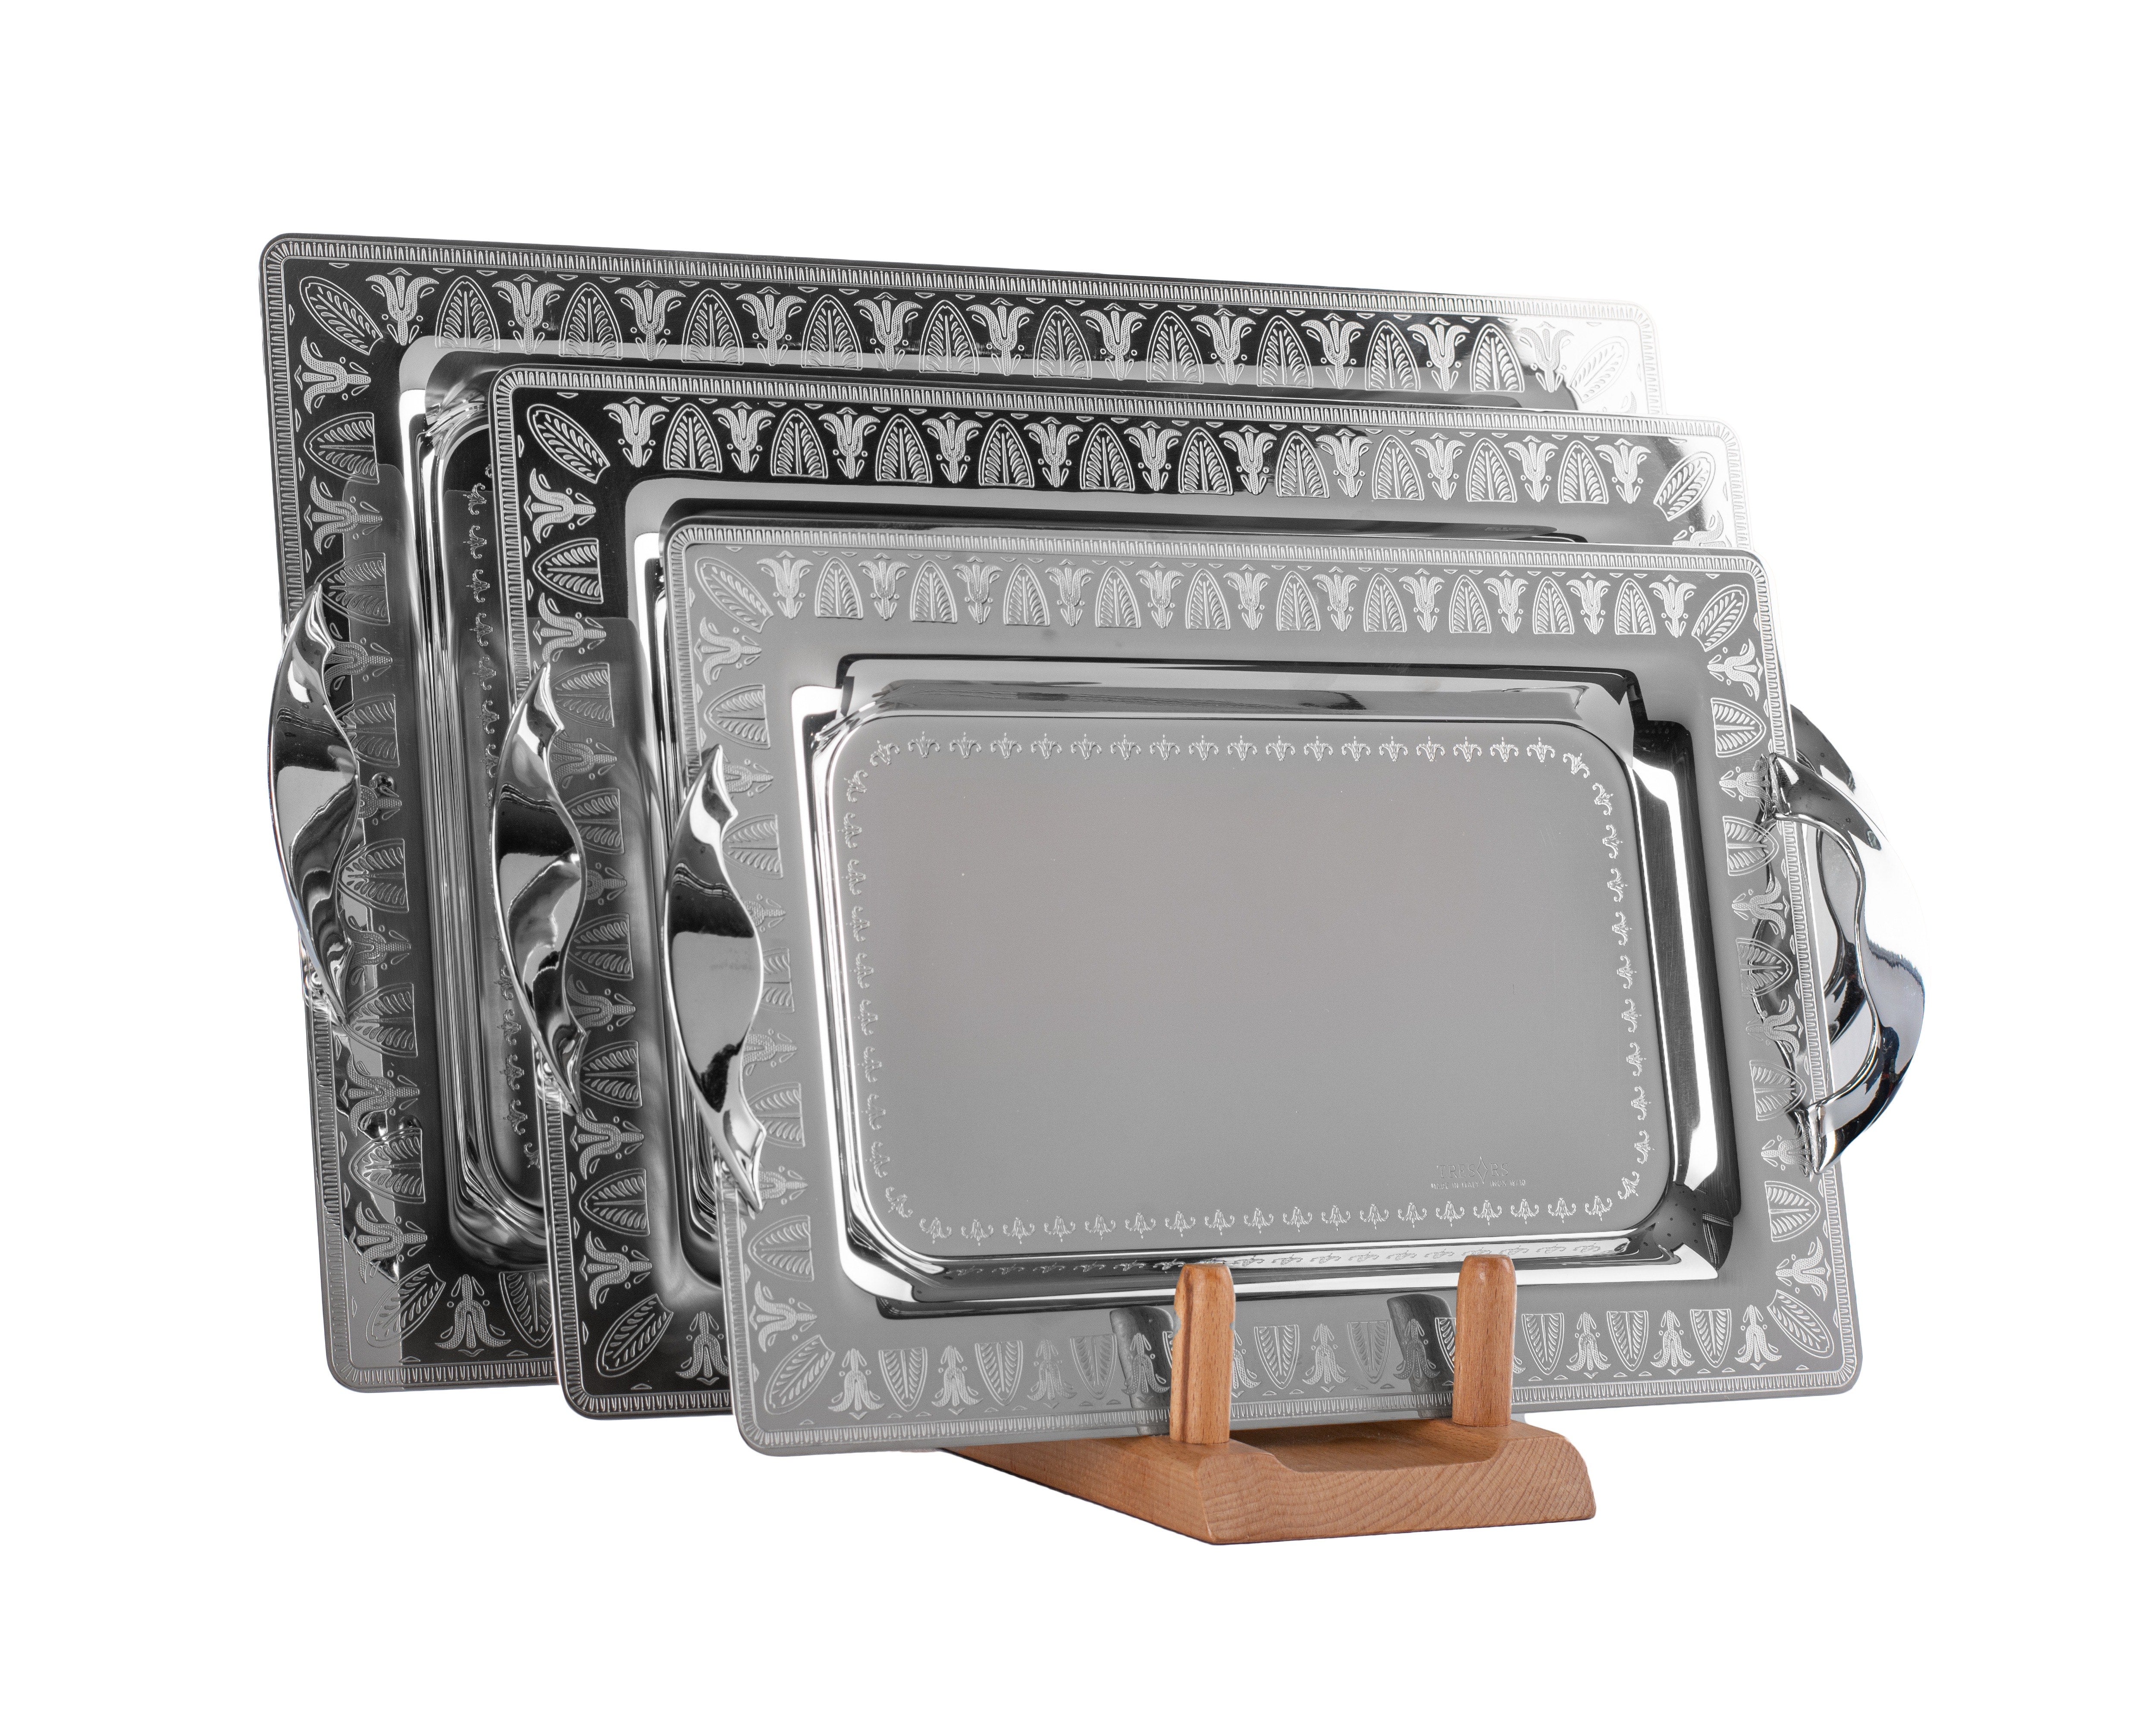 Tresors Rectangular Tray with Handles, 3 Pieces -Made in Italy -Silver -Stainless Steel 18/10